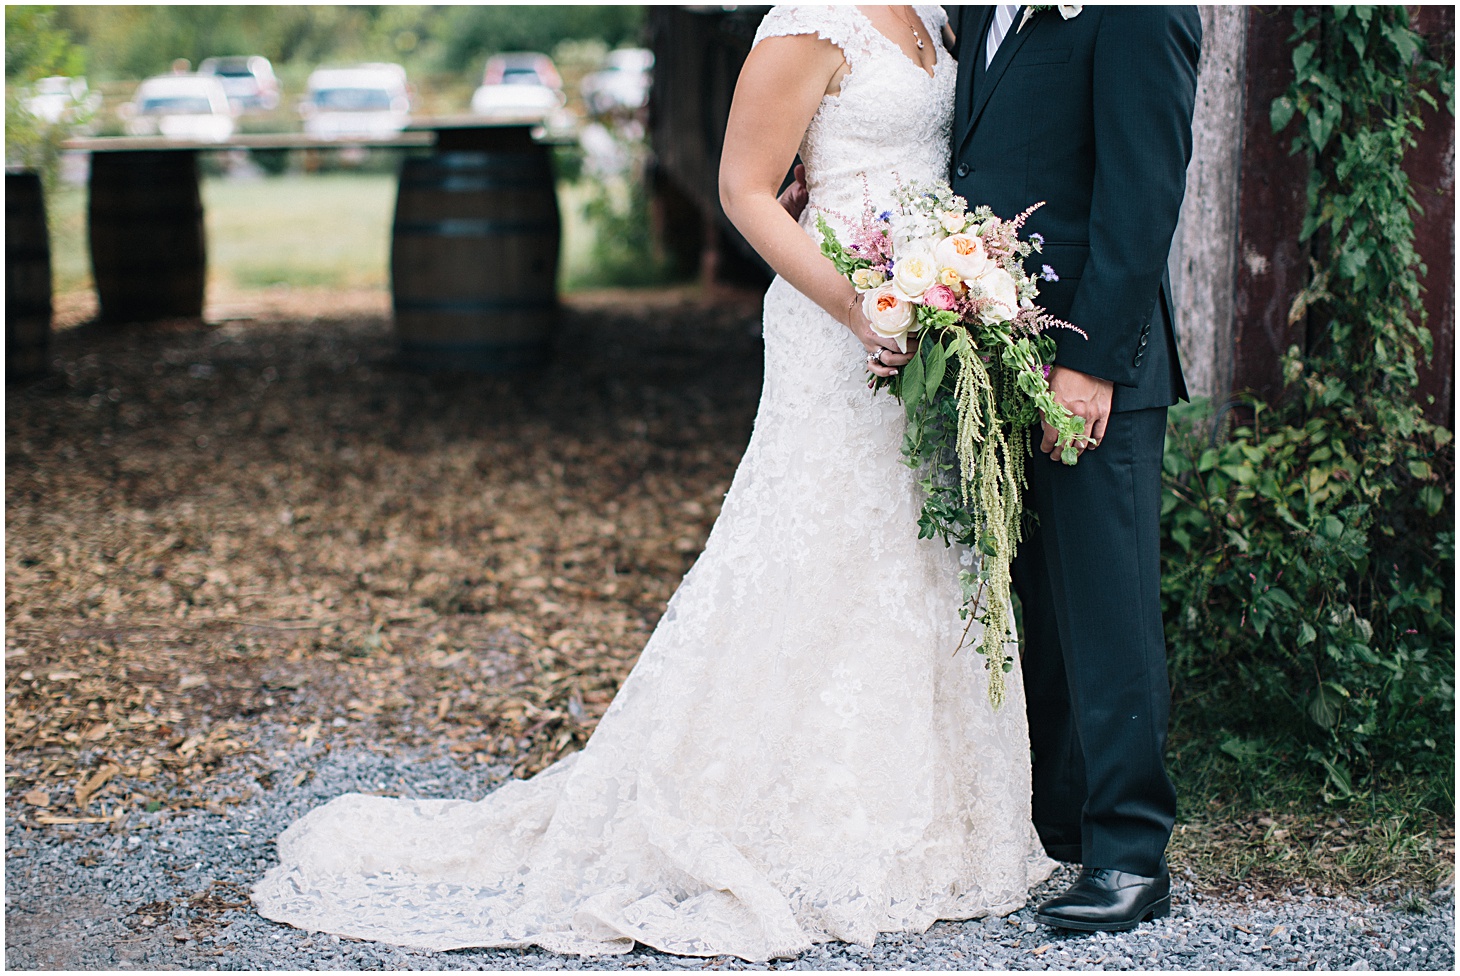 Rustic Floral Wedding at Rocklands Farm & Winery by Sarah Bradshaw Photography_0007